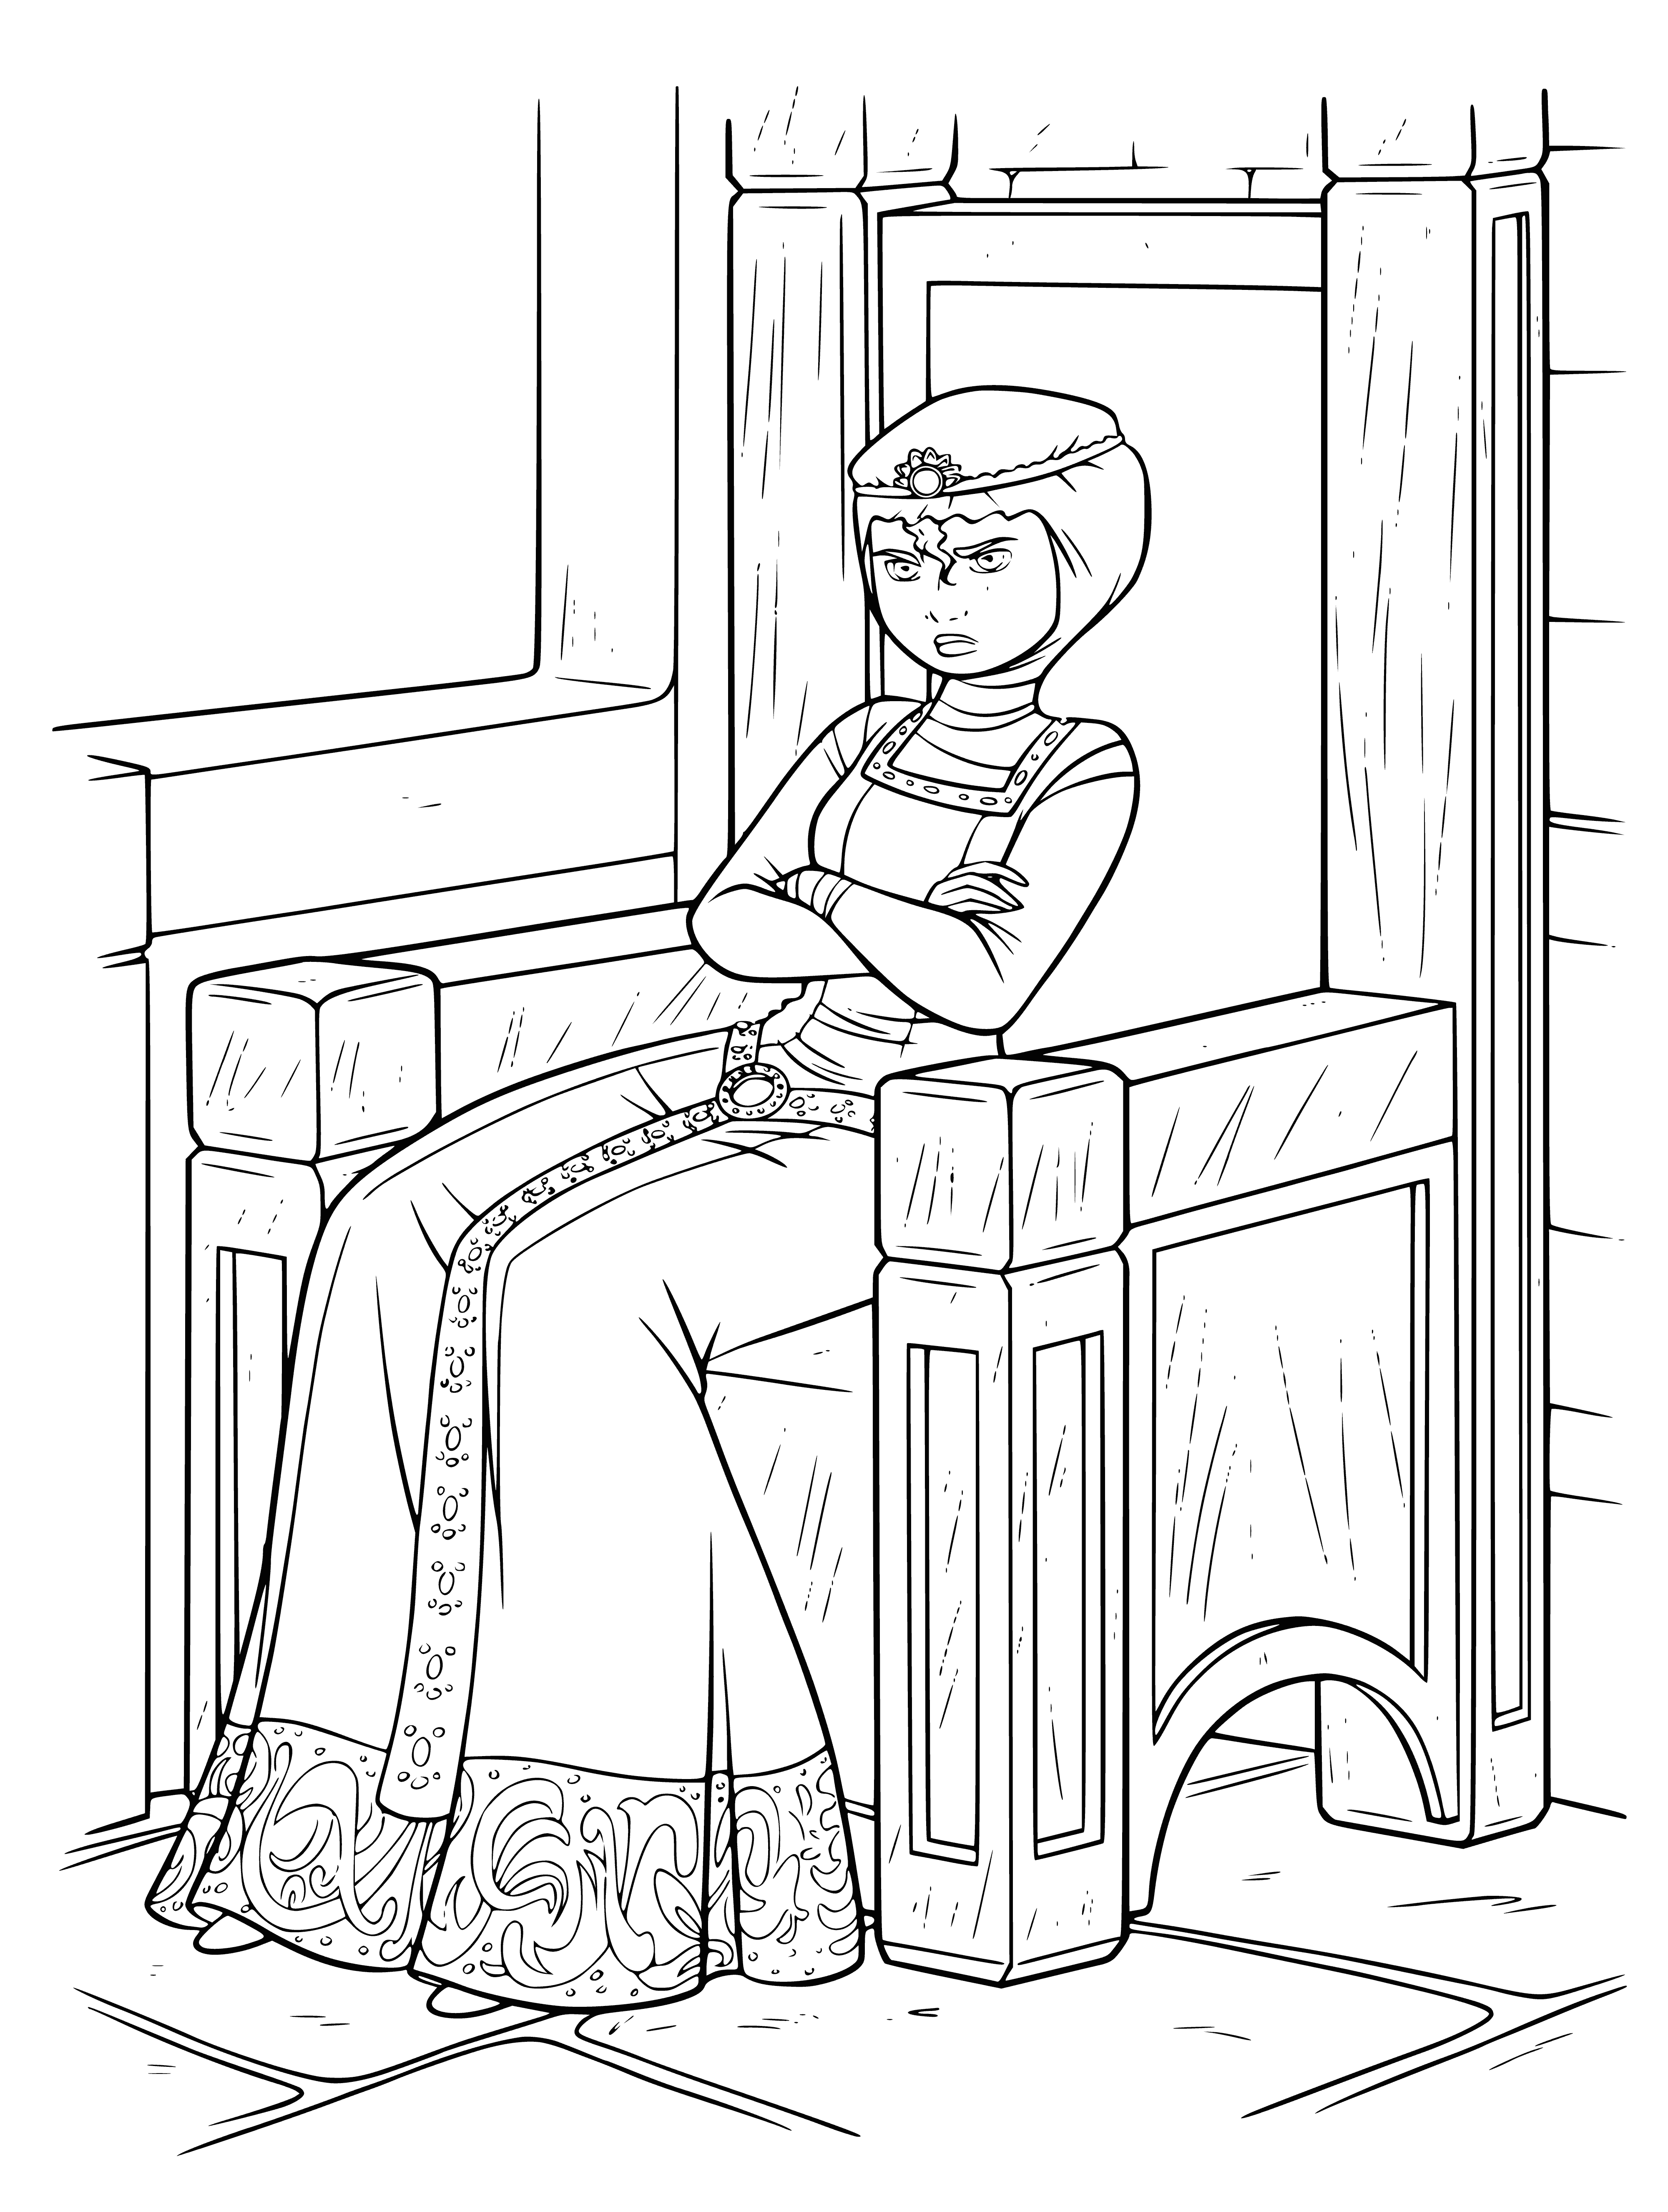 Merida on the throne coloring page